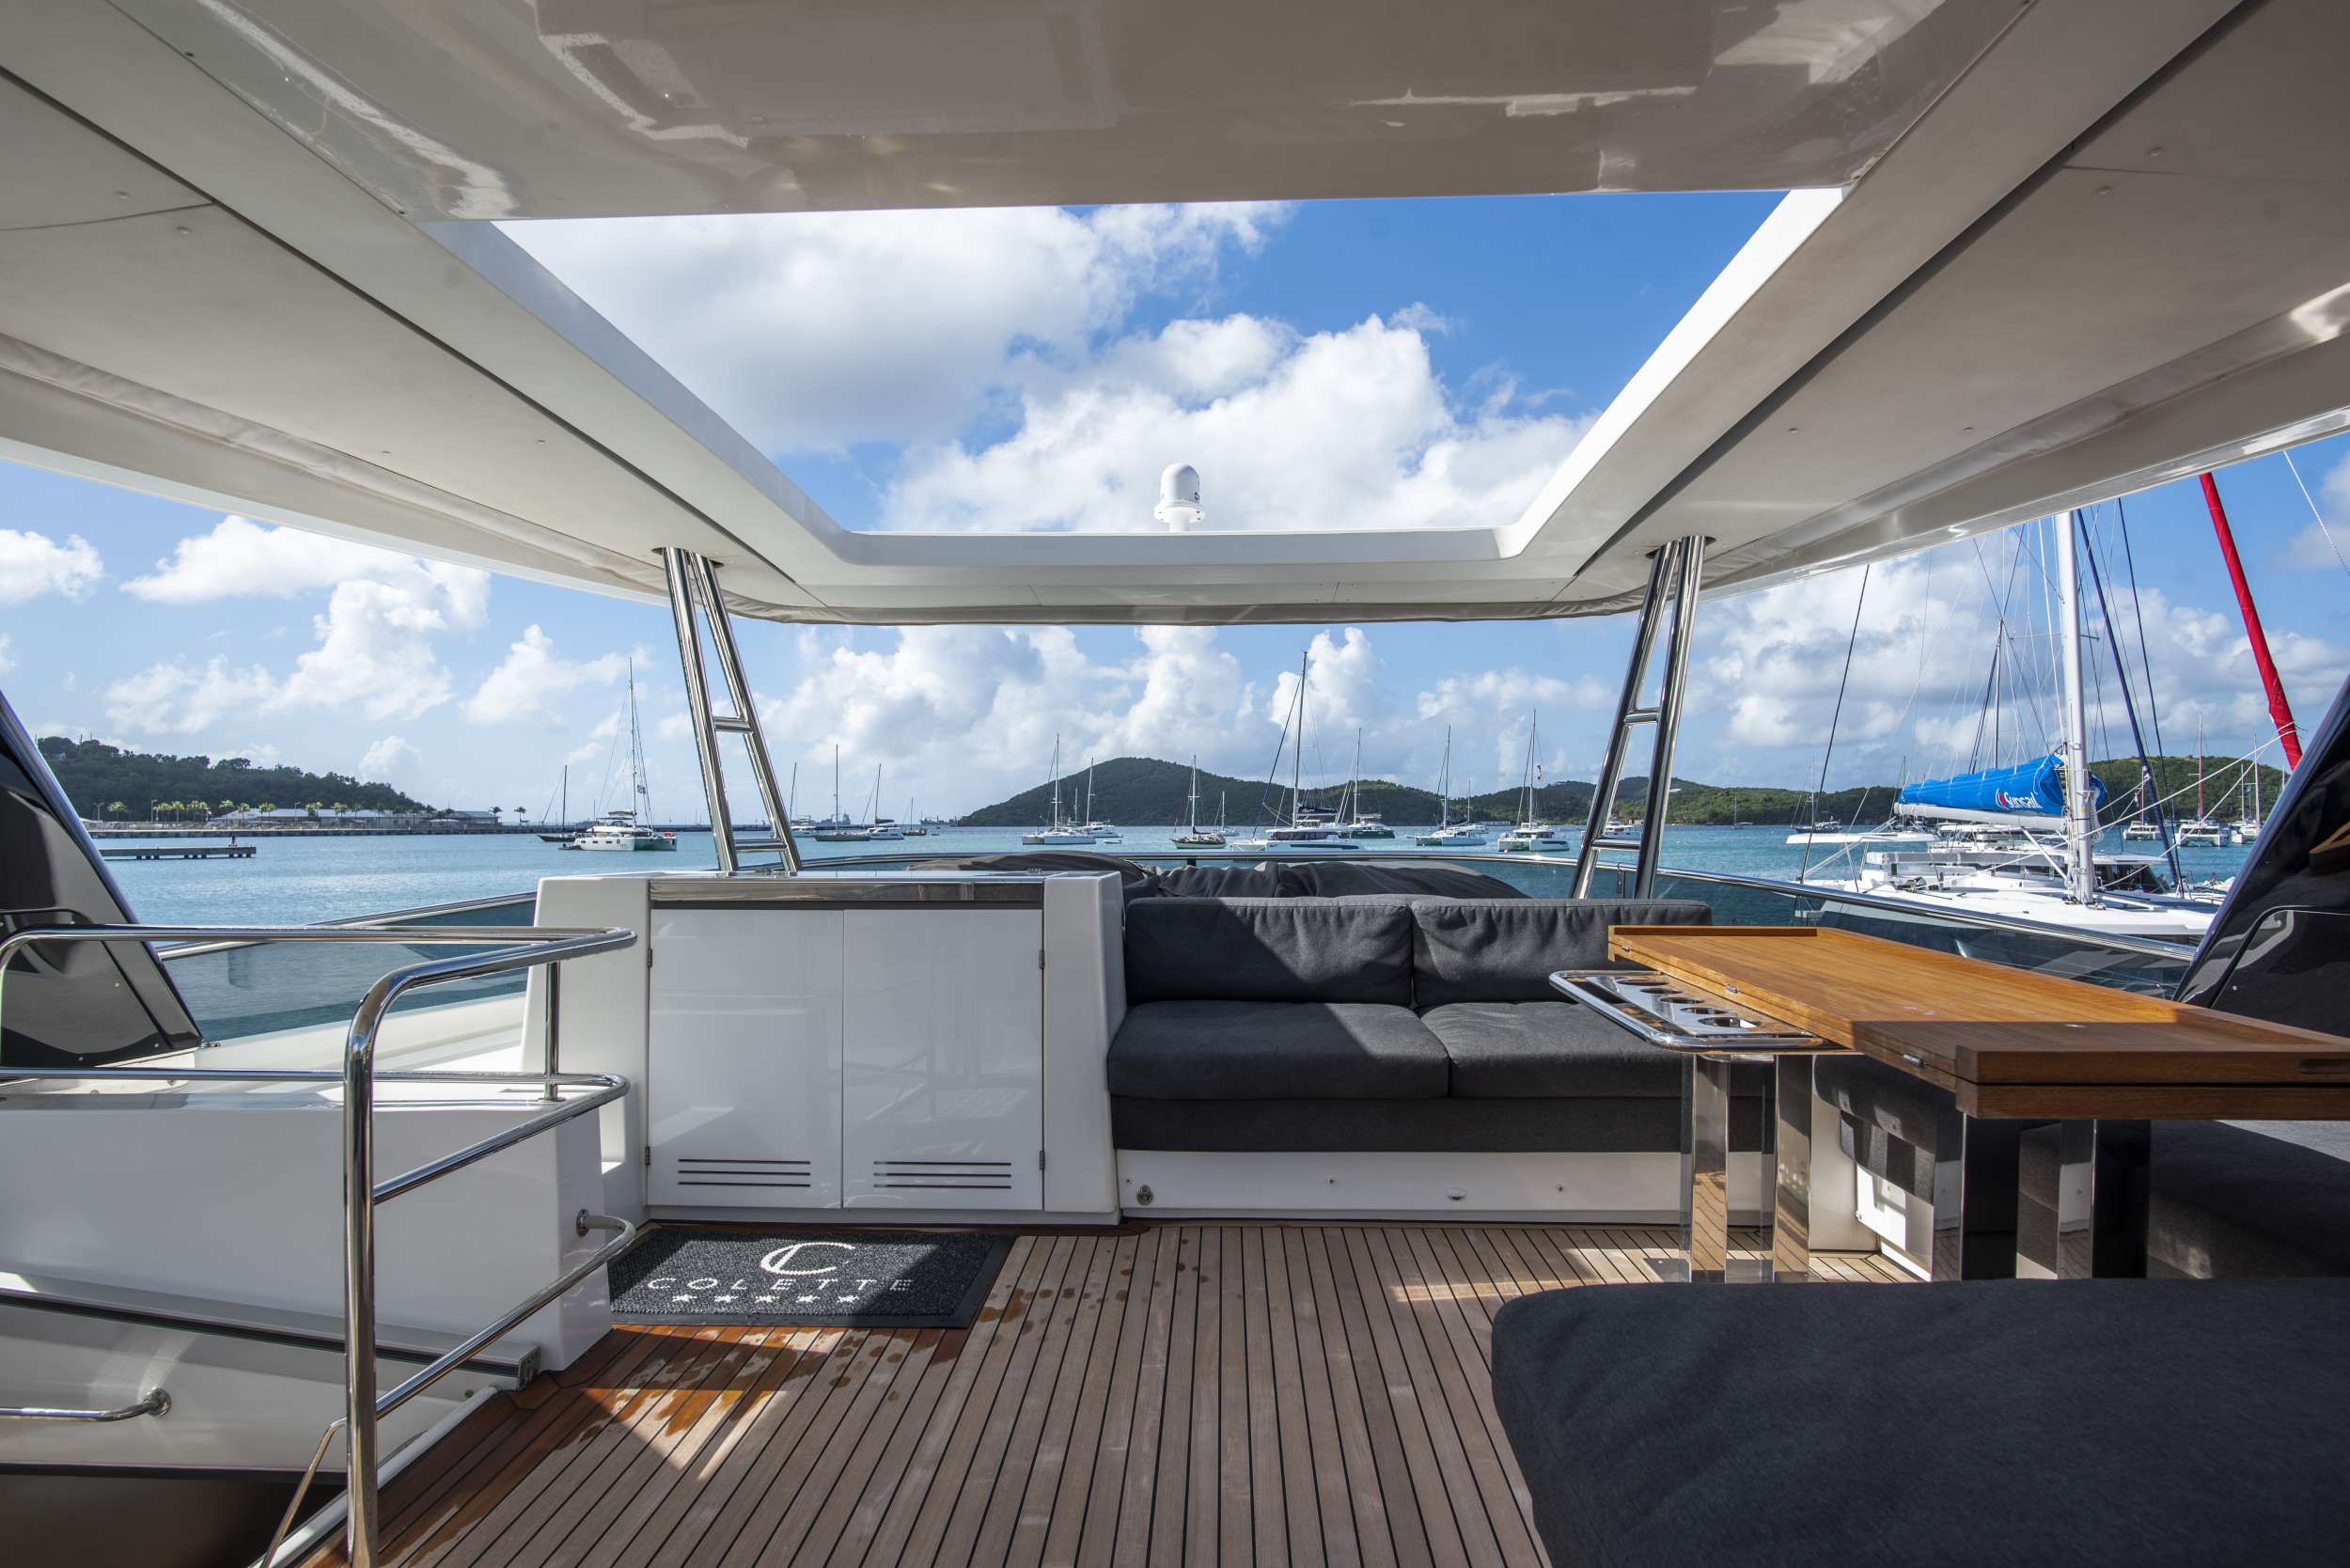 COLETTE Yacht Charter - Lounge or dine on the flybridge with sun roof